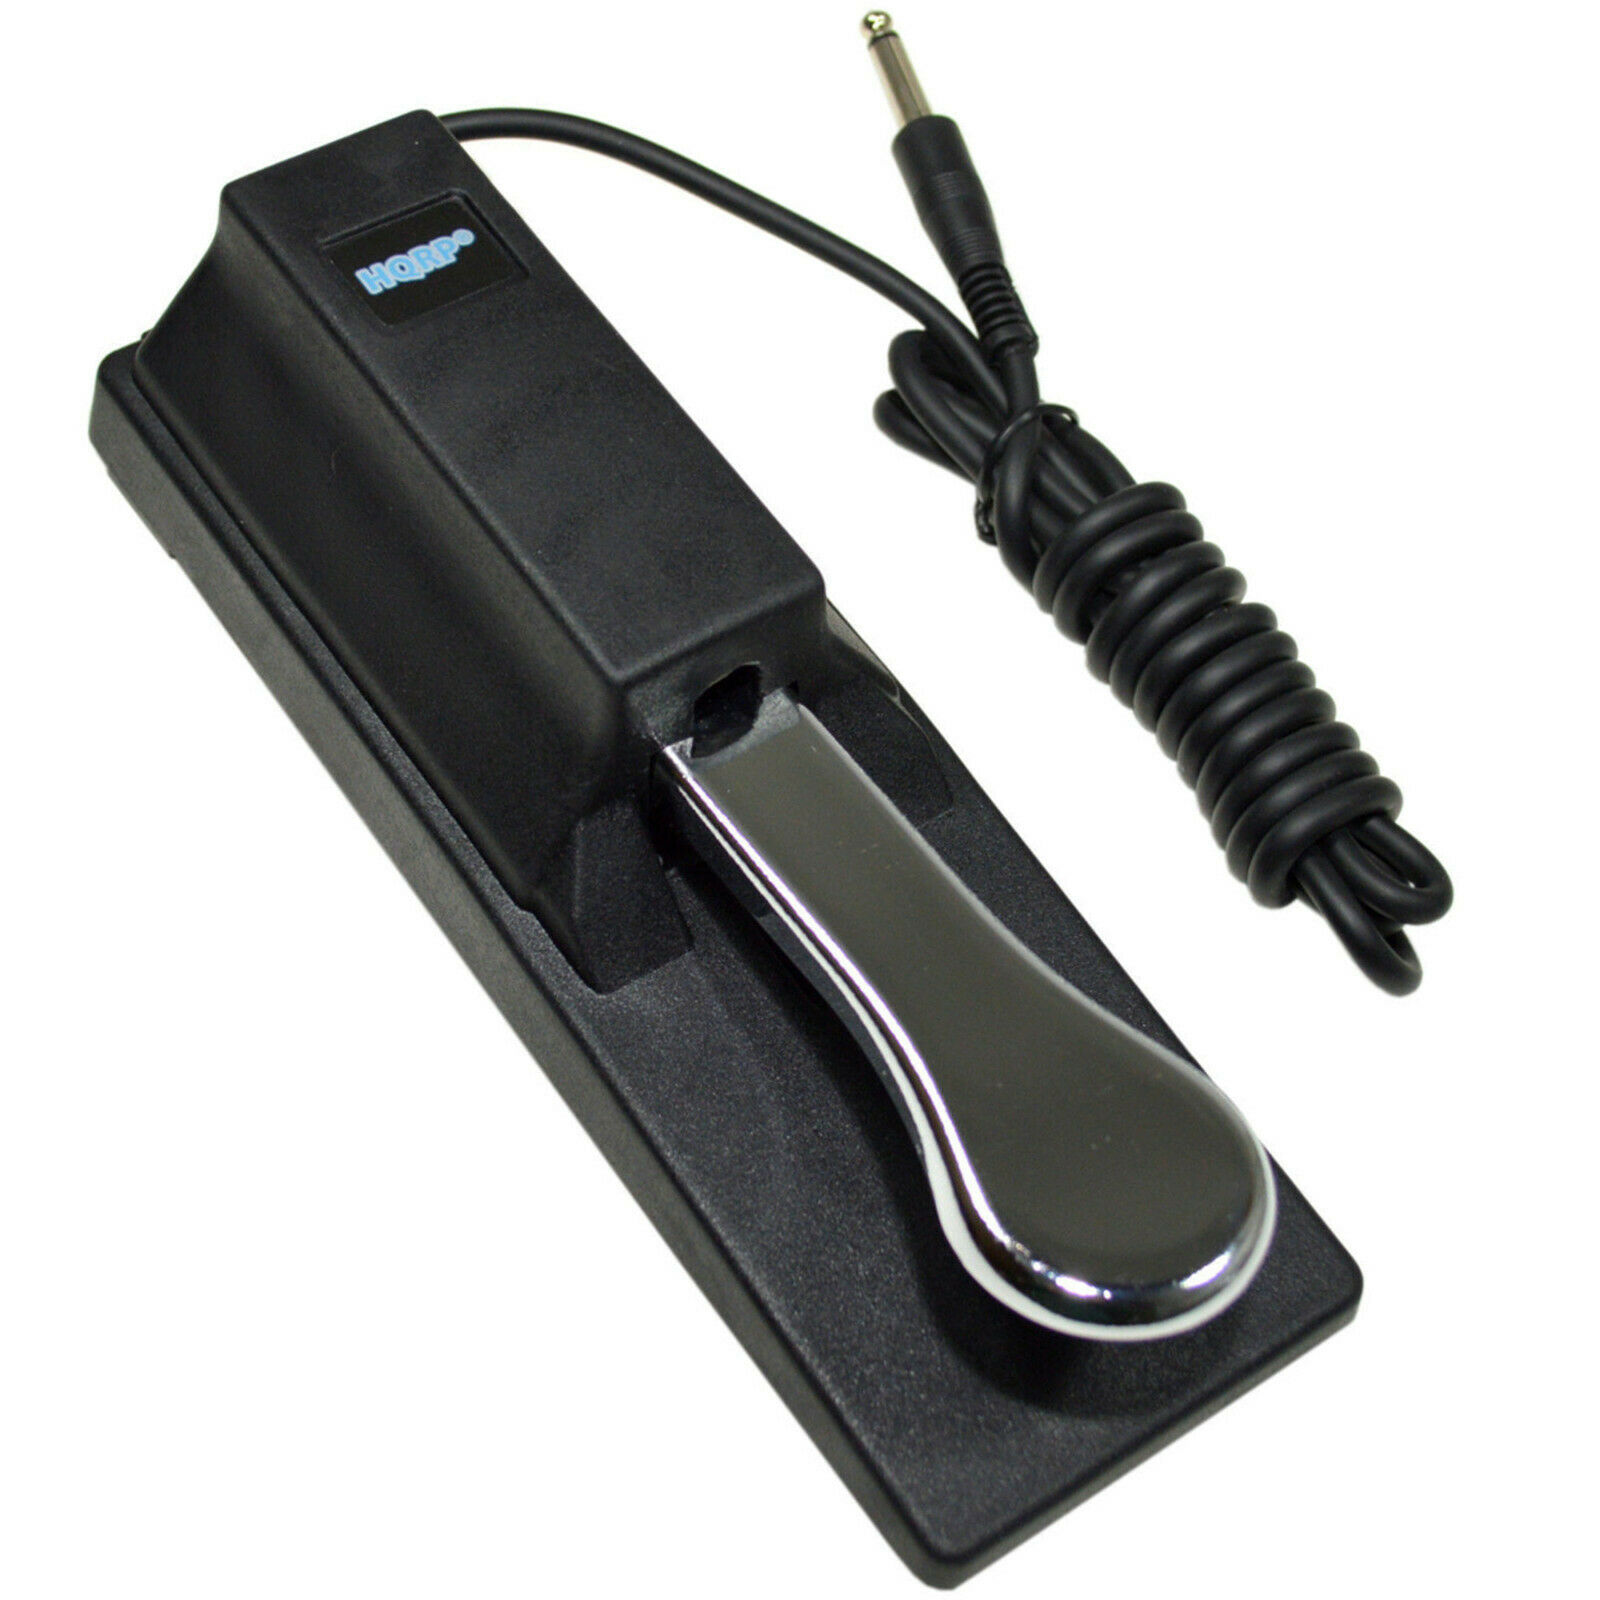 Sustain Pedal For Yamaha Series Electronic Keyboards Synthesizers Drum Machines